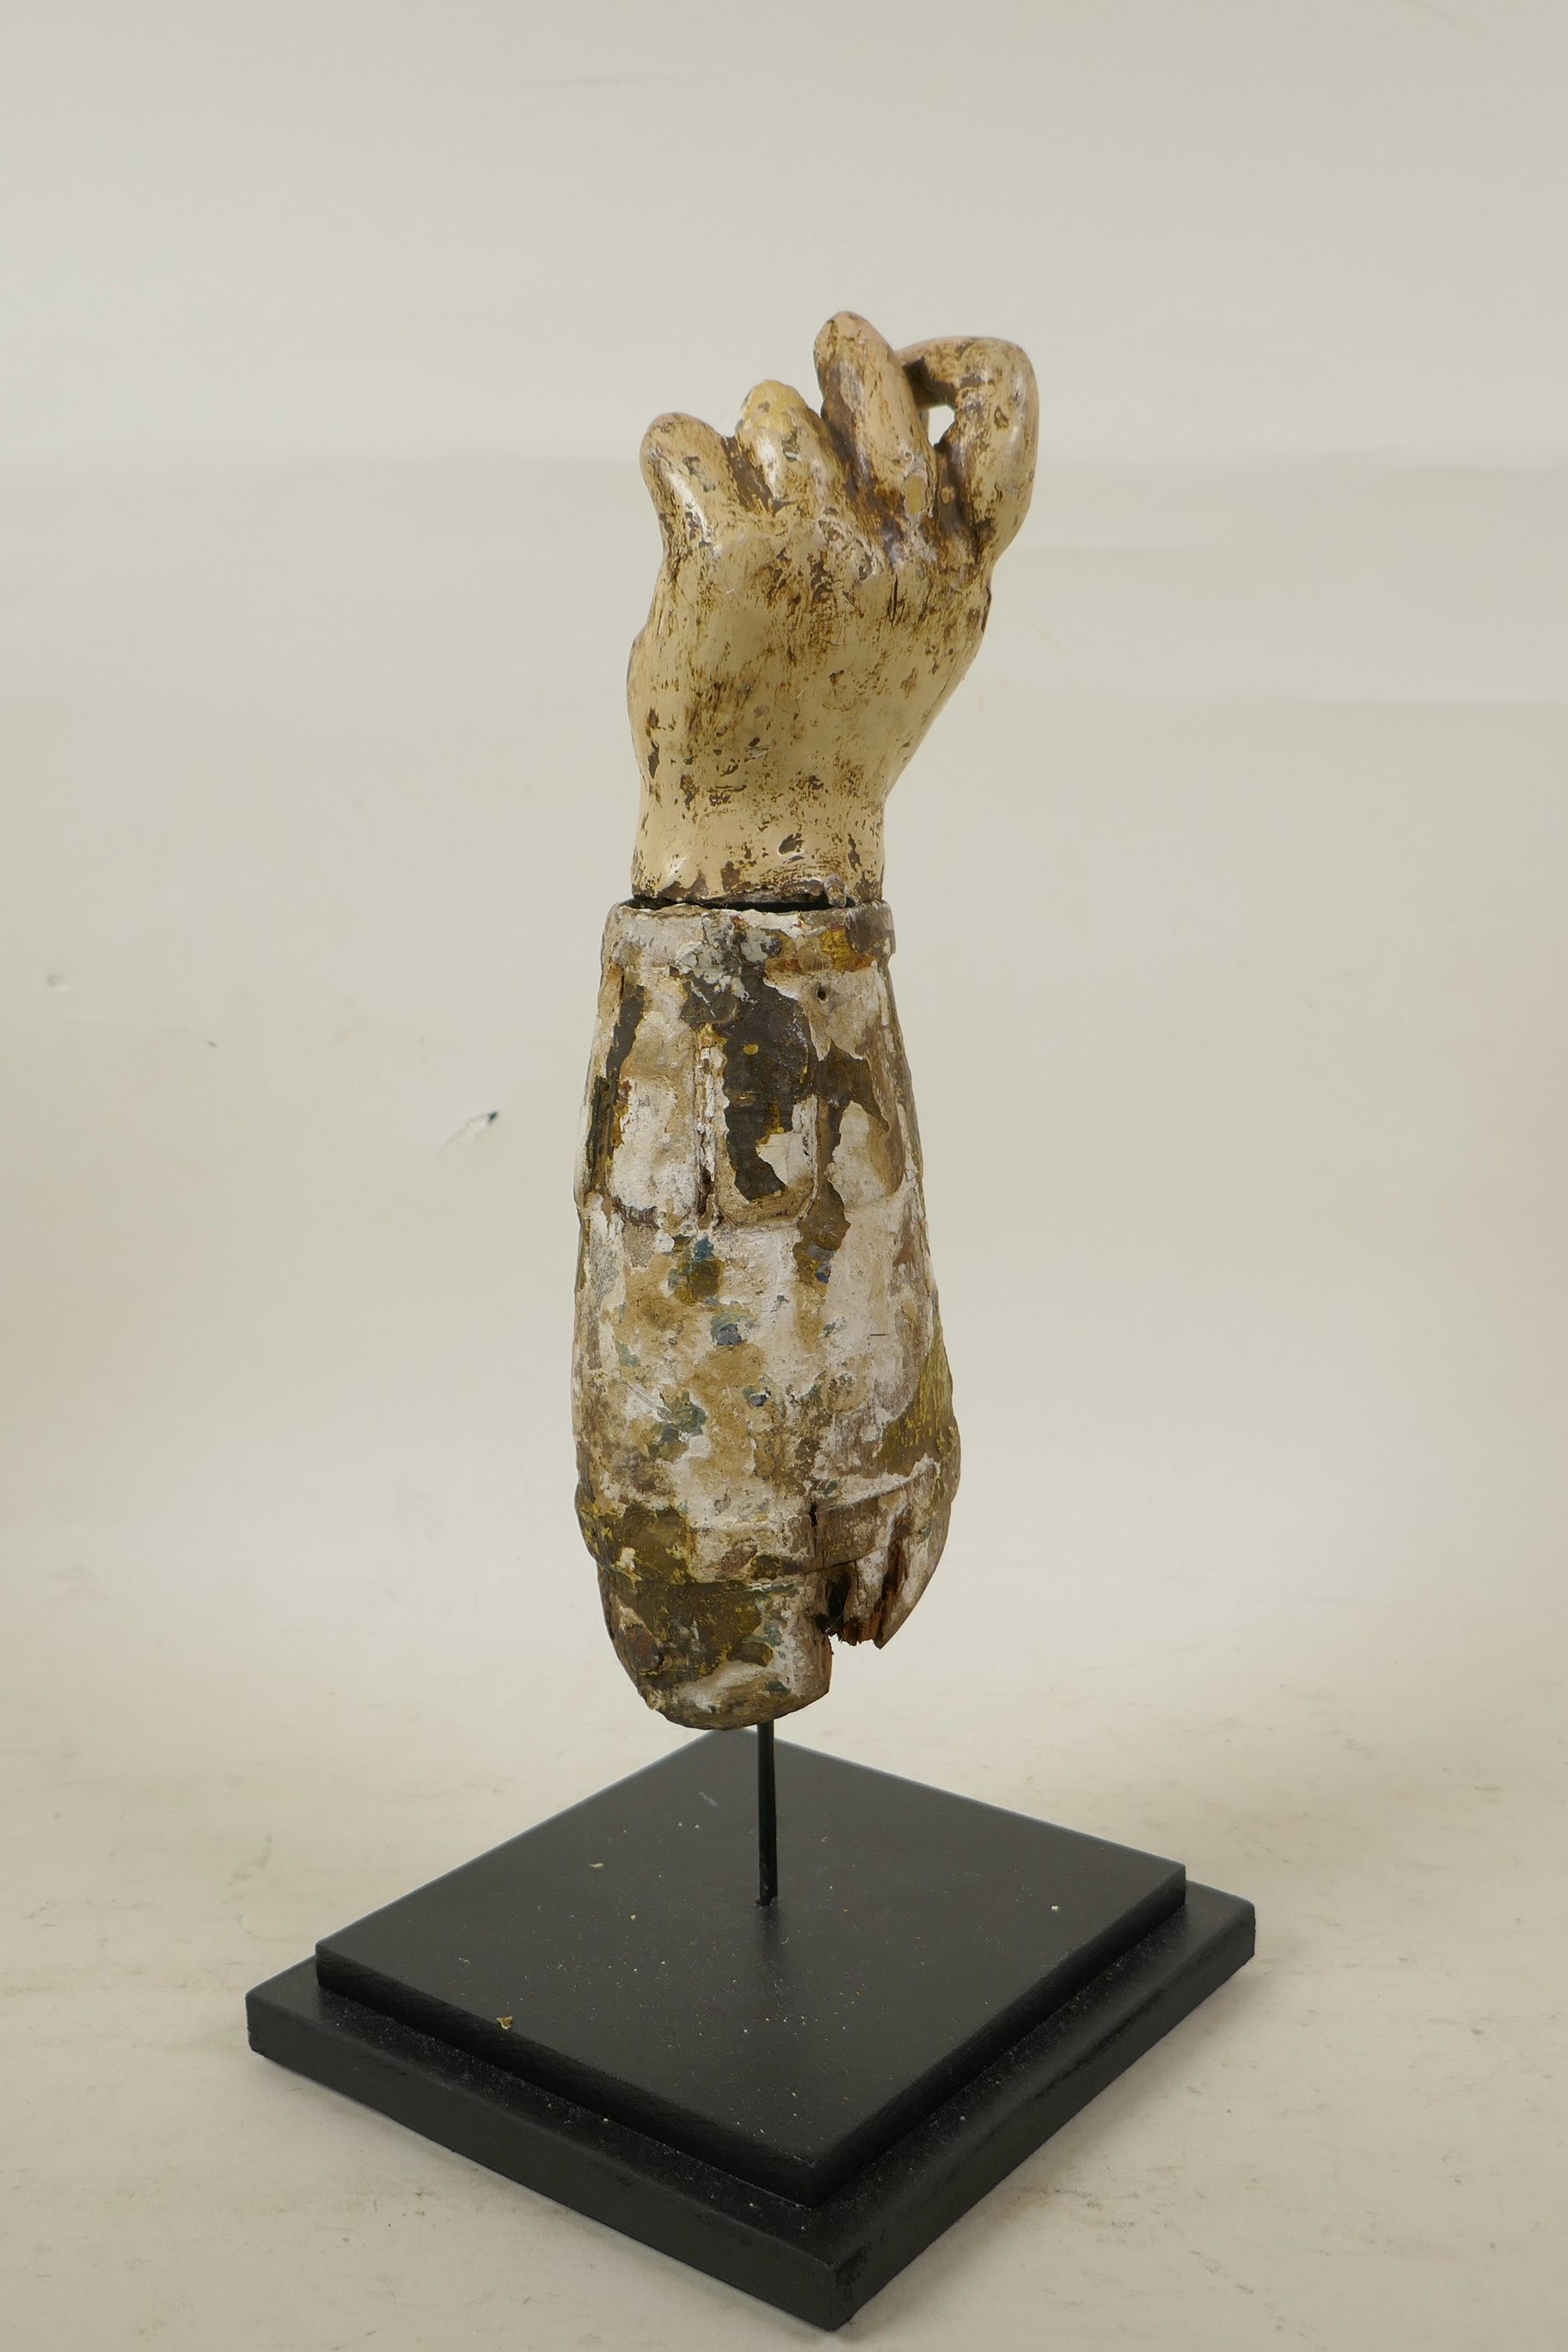 A C18th carved and parcel gilt wood hand, mounted, 12½" high, losses - Image 3 of 4